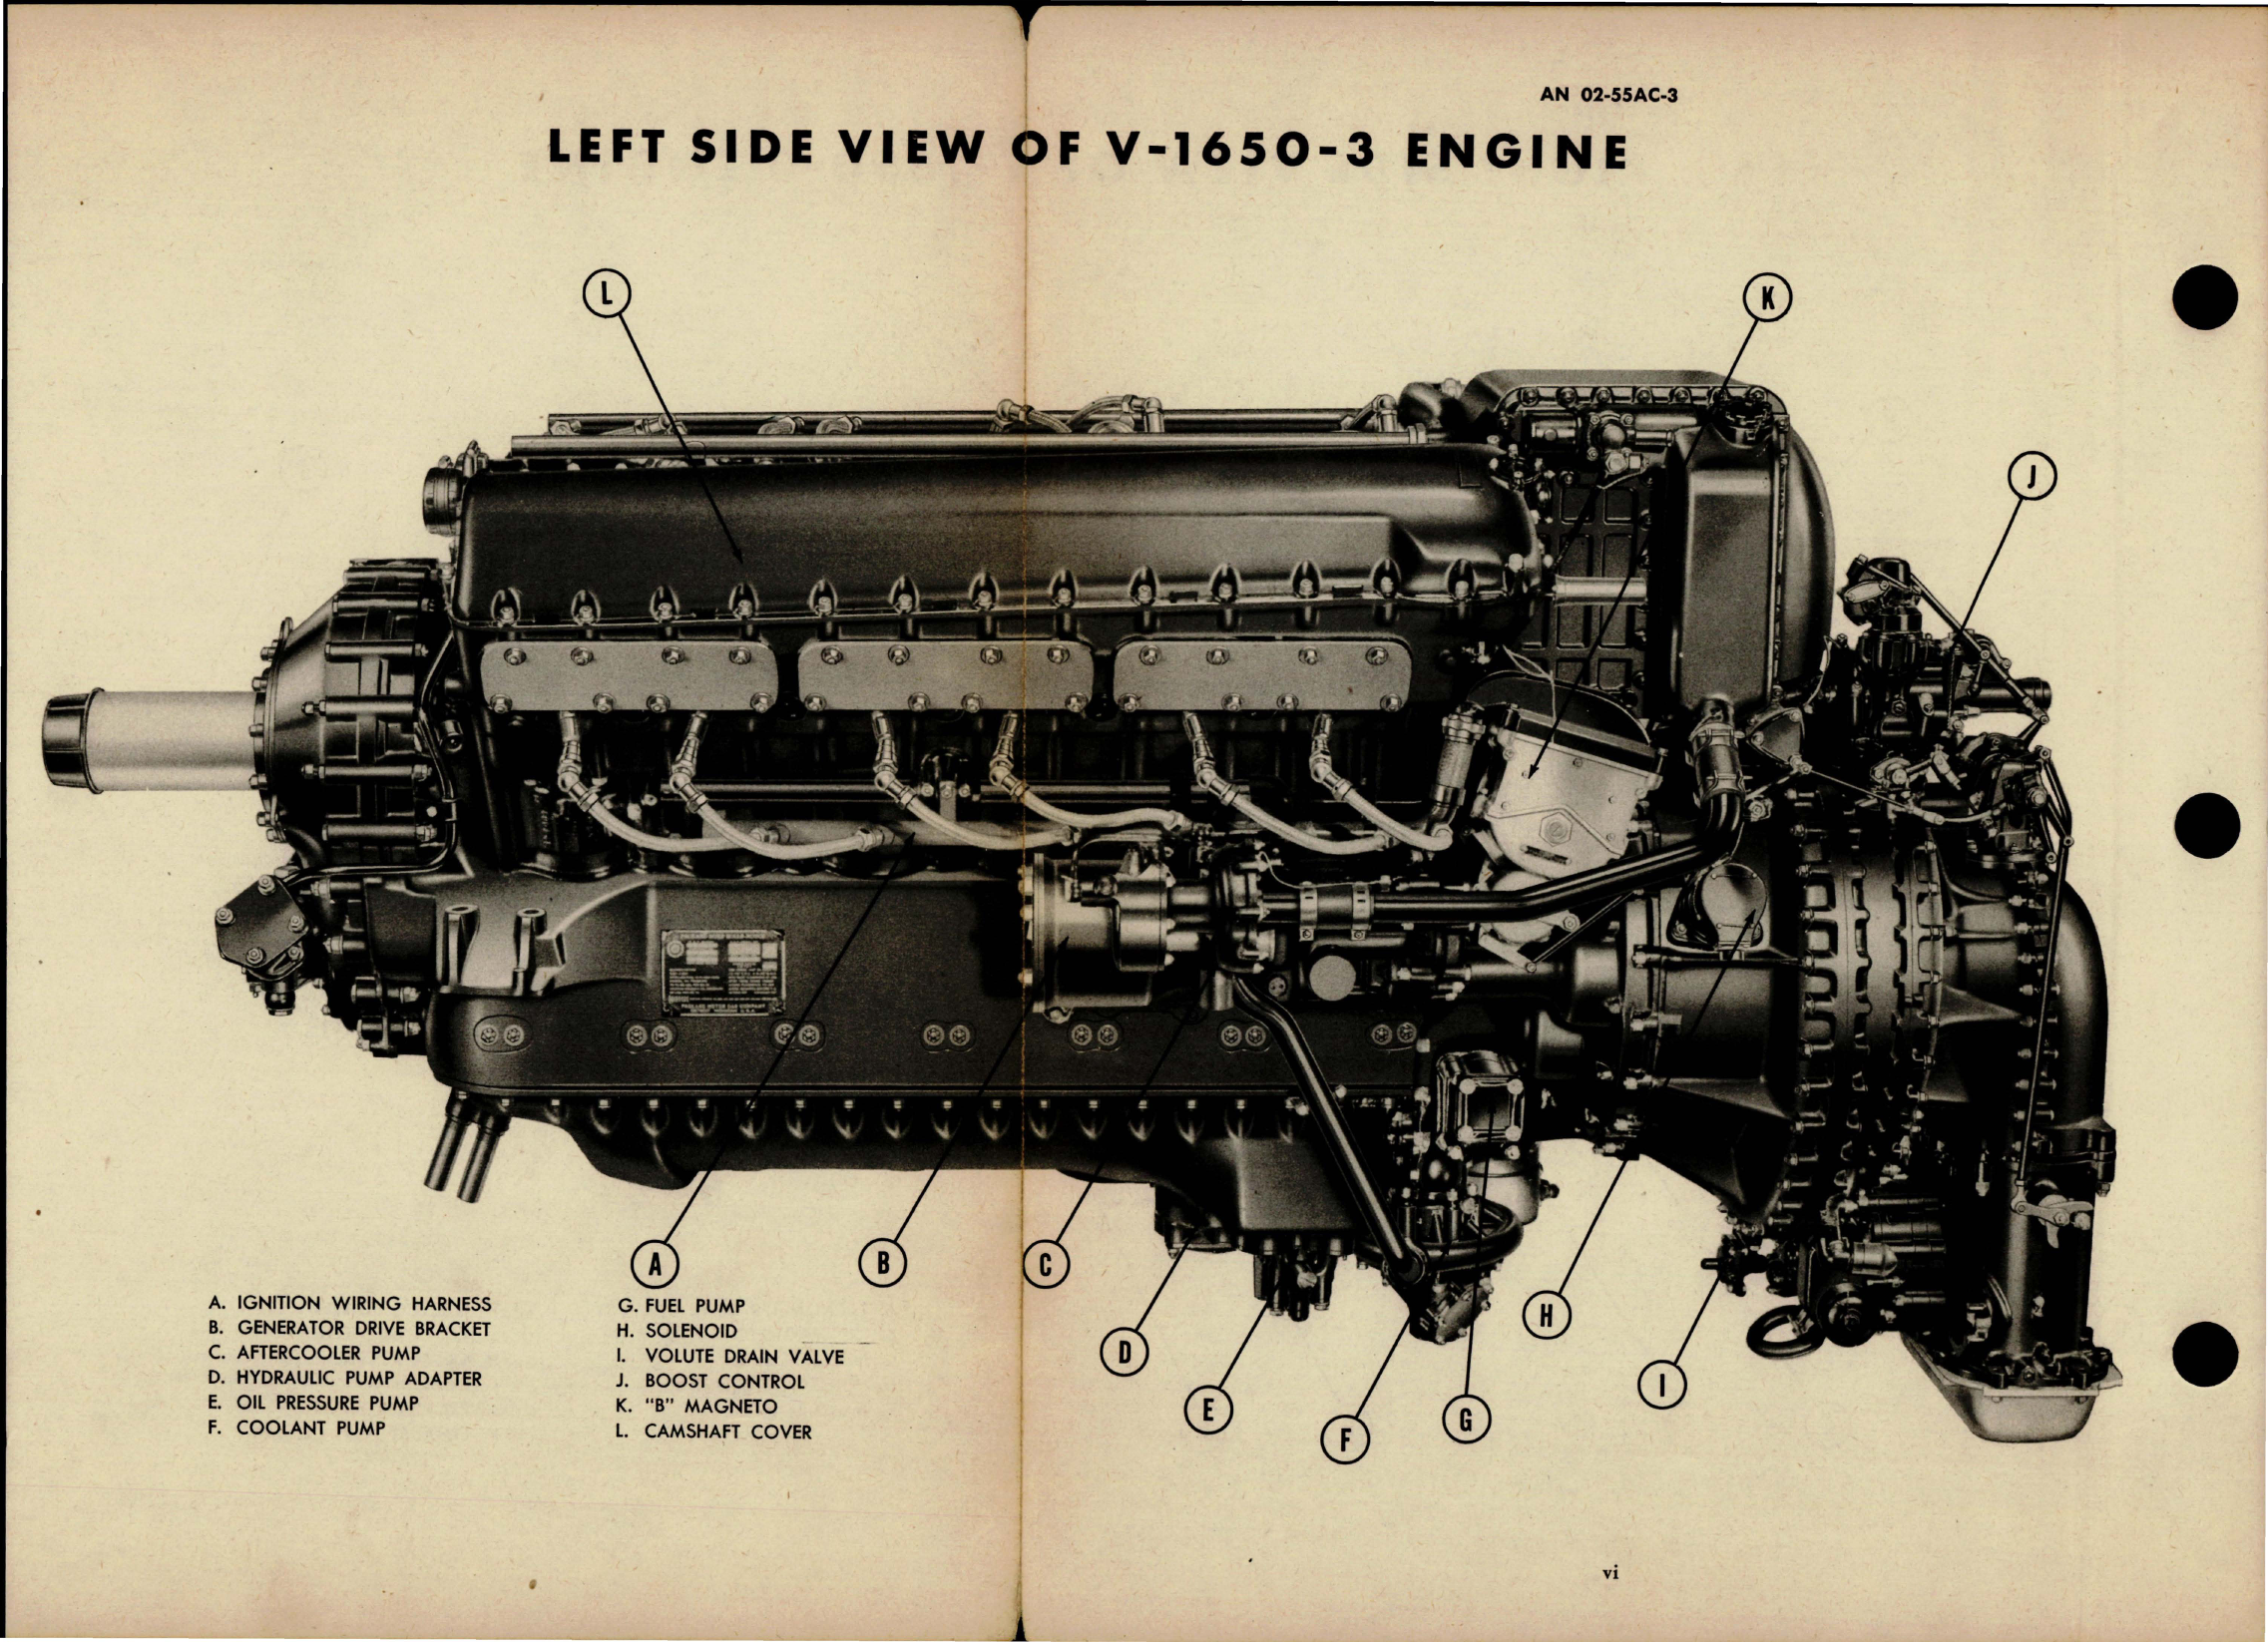 Sample page 8 from AirCorps Library document: Overhaul Instructions for Aircraft Engines - V-1650-3, V-1650-7, Merlin 68 and 69